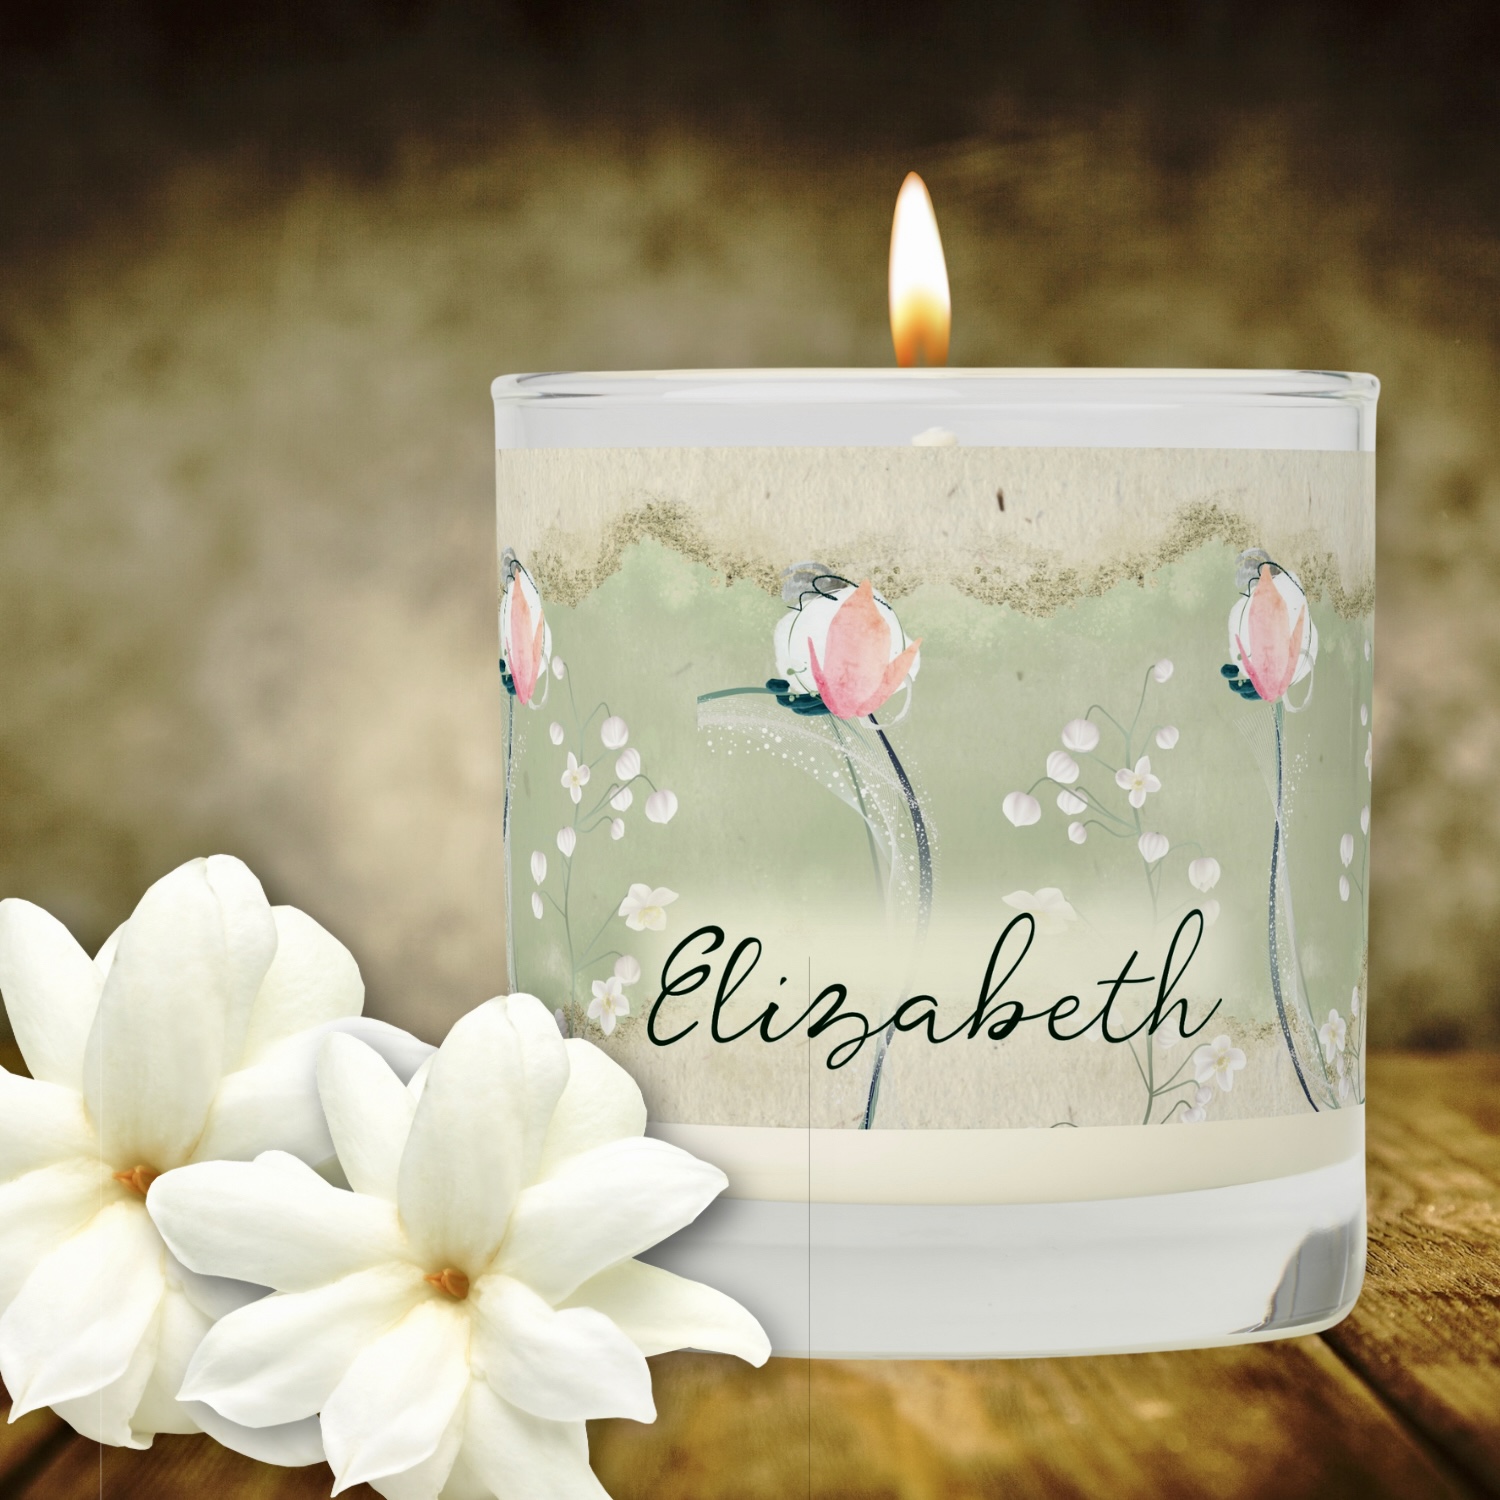 Scented candle featuring a bohemian-inspired design of delicate white flowers on a moss green background. The candle comes in a reusable jar with a lid, offering a practical and stylish way to fill your she shed space with a soothing fragrance. The floral pattern on the jar adds a touch of elegance and earthy charm, while the lid helps preserve the scent between uses. Ideal for creating a cozy ambiance in any room.